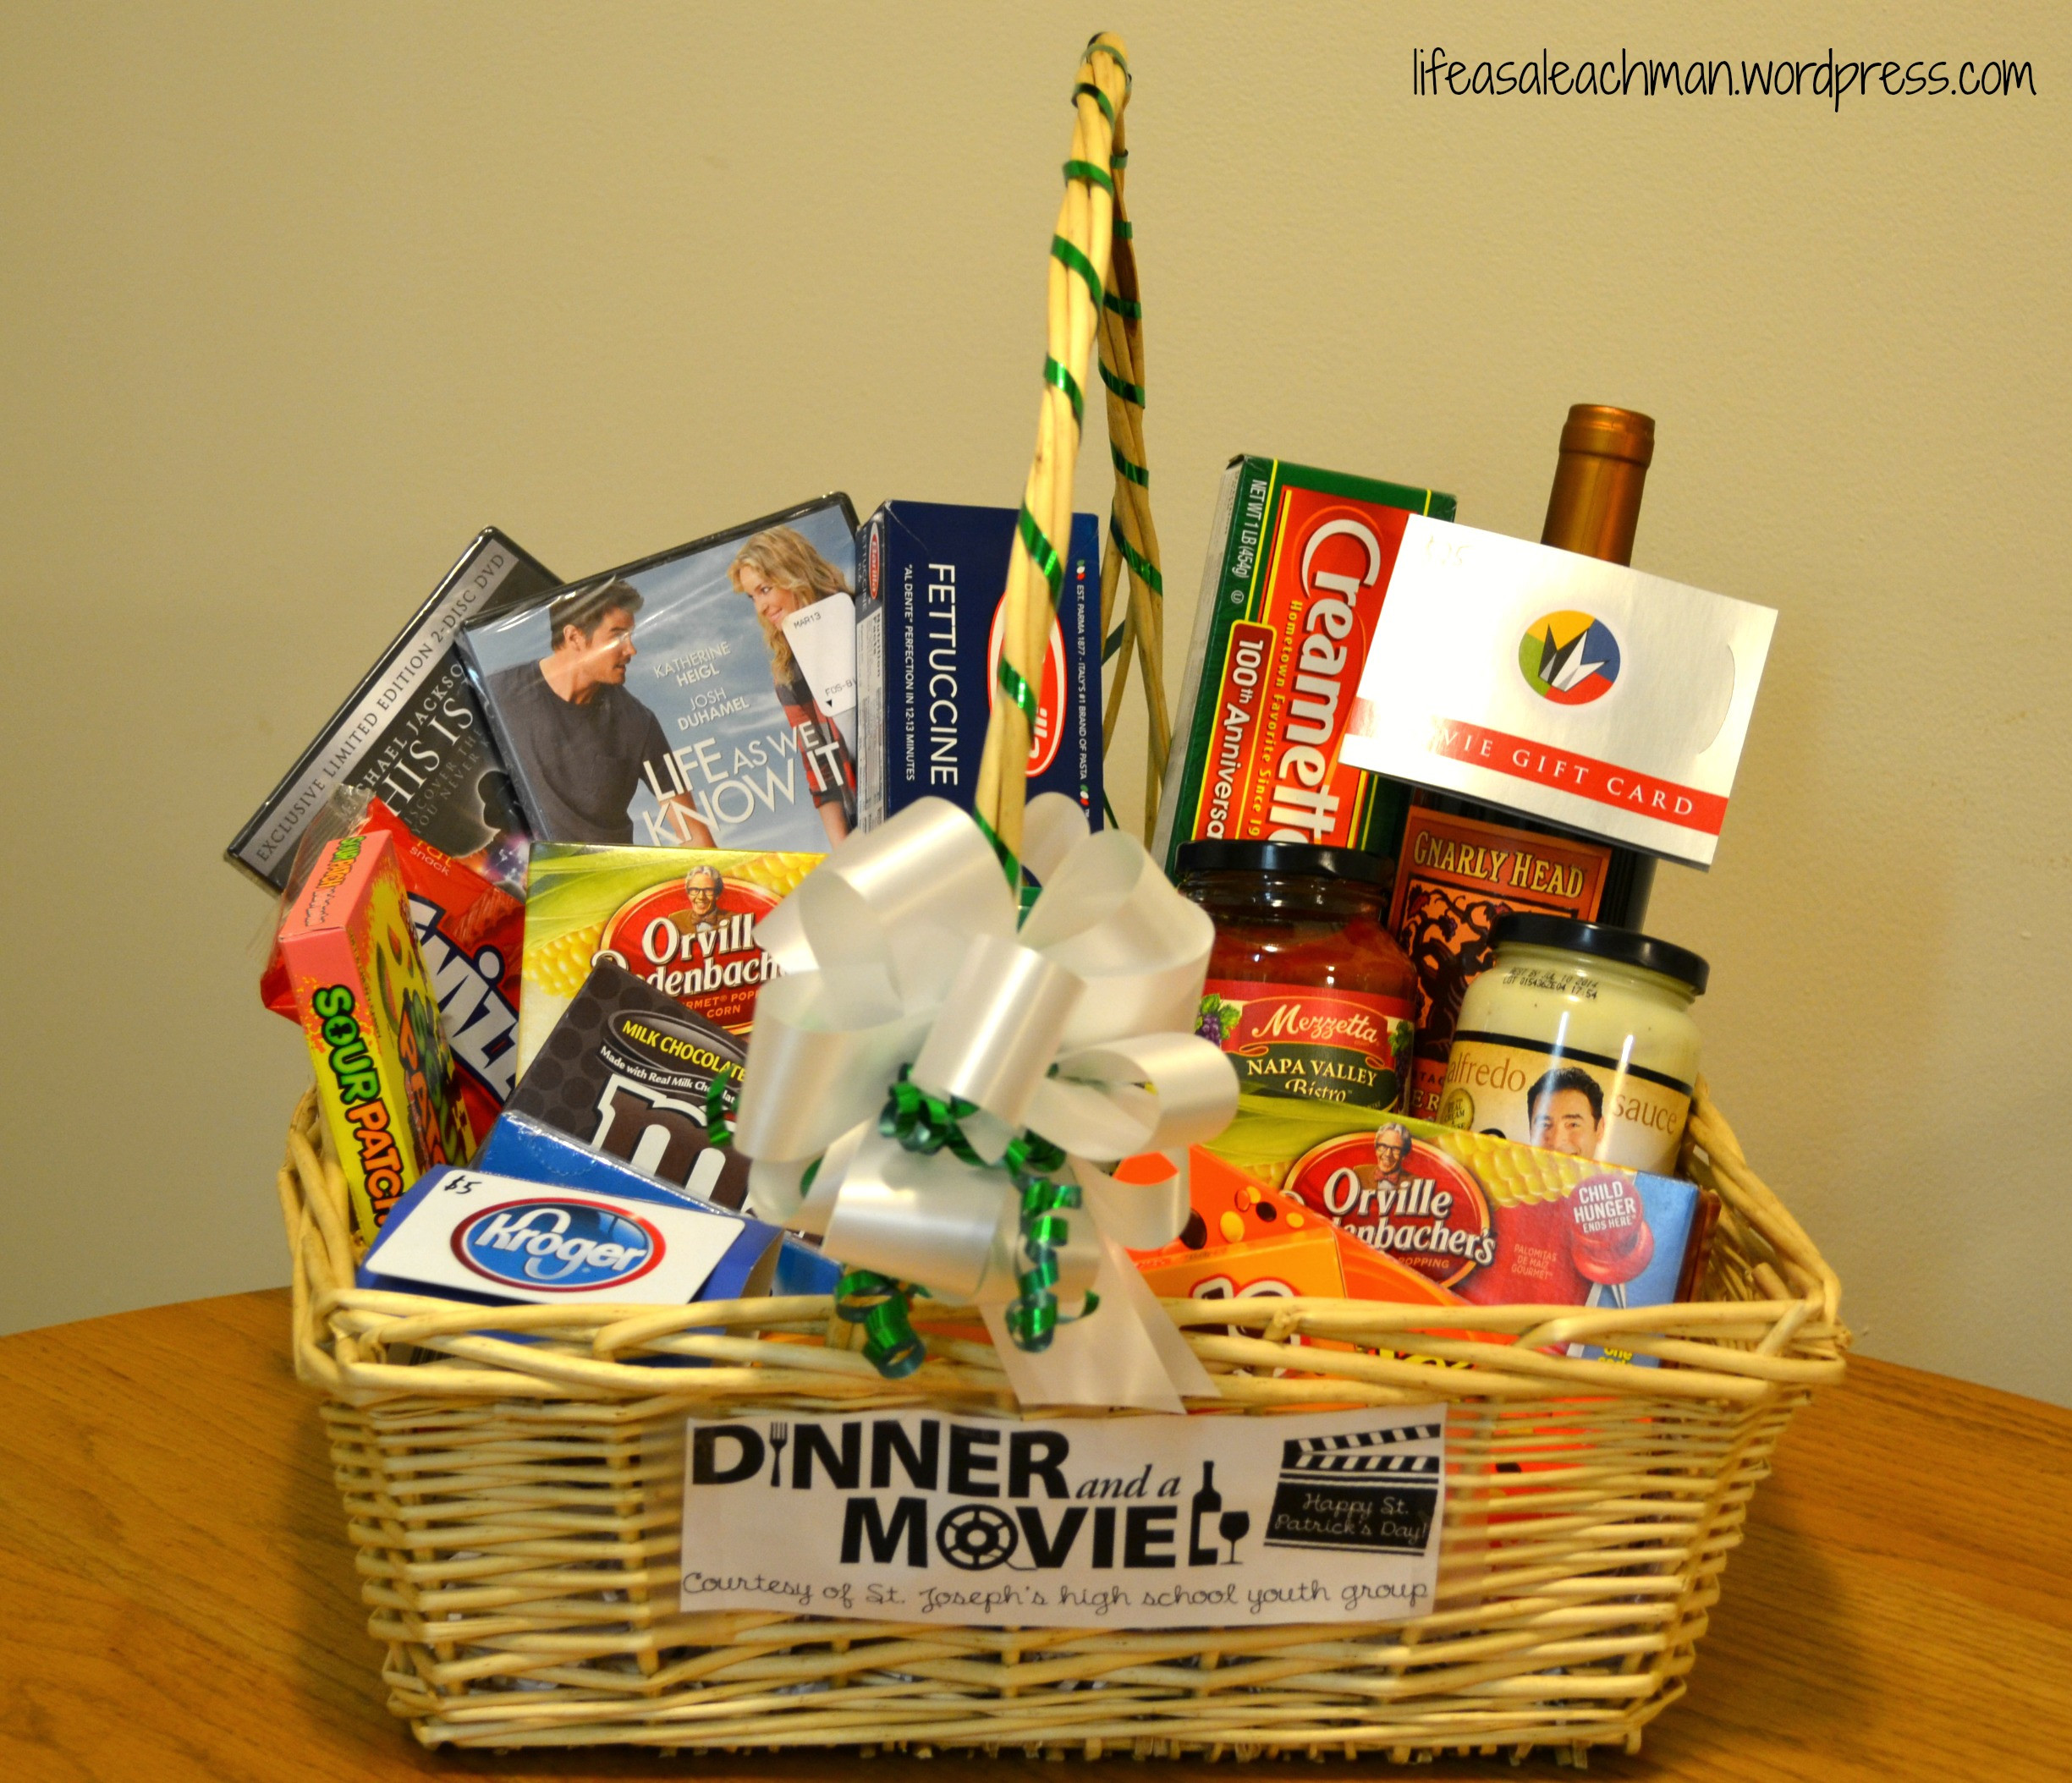 Dinner And A Movie Gift Basket Ideas
 ‘Dinner & a Movie’ t basket